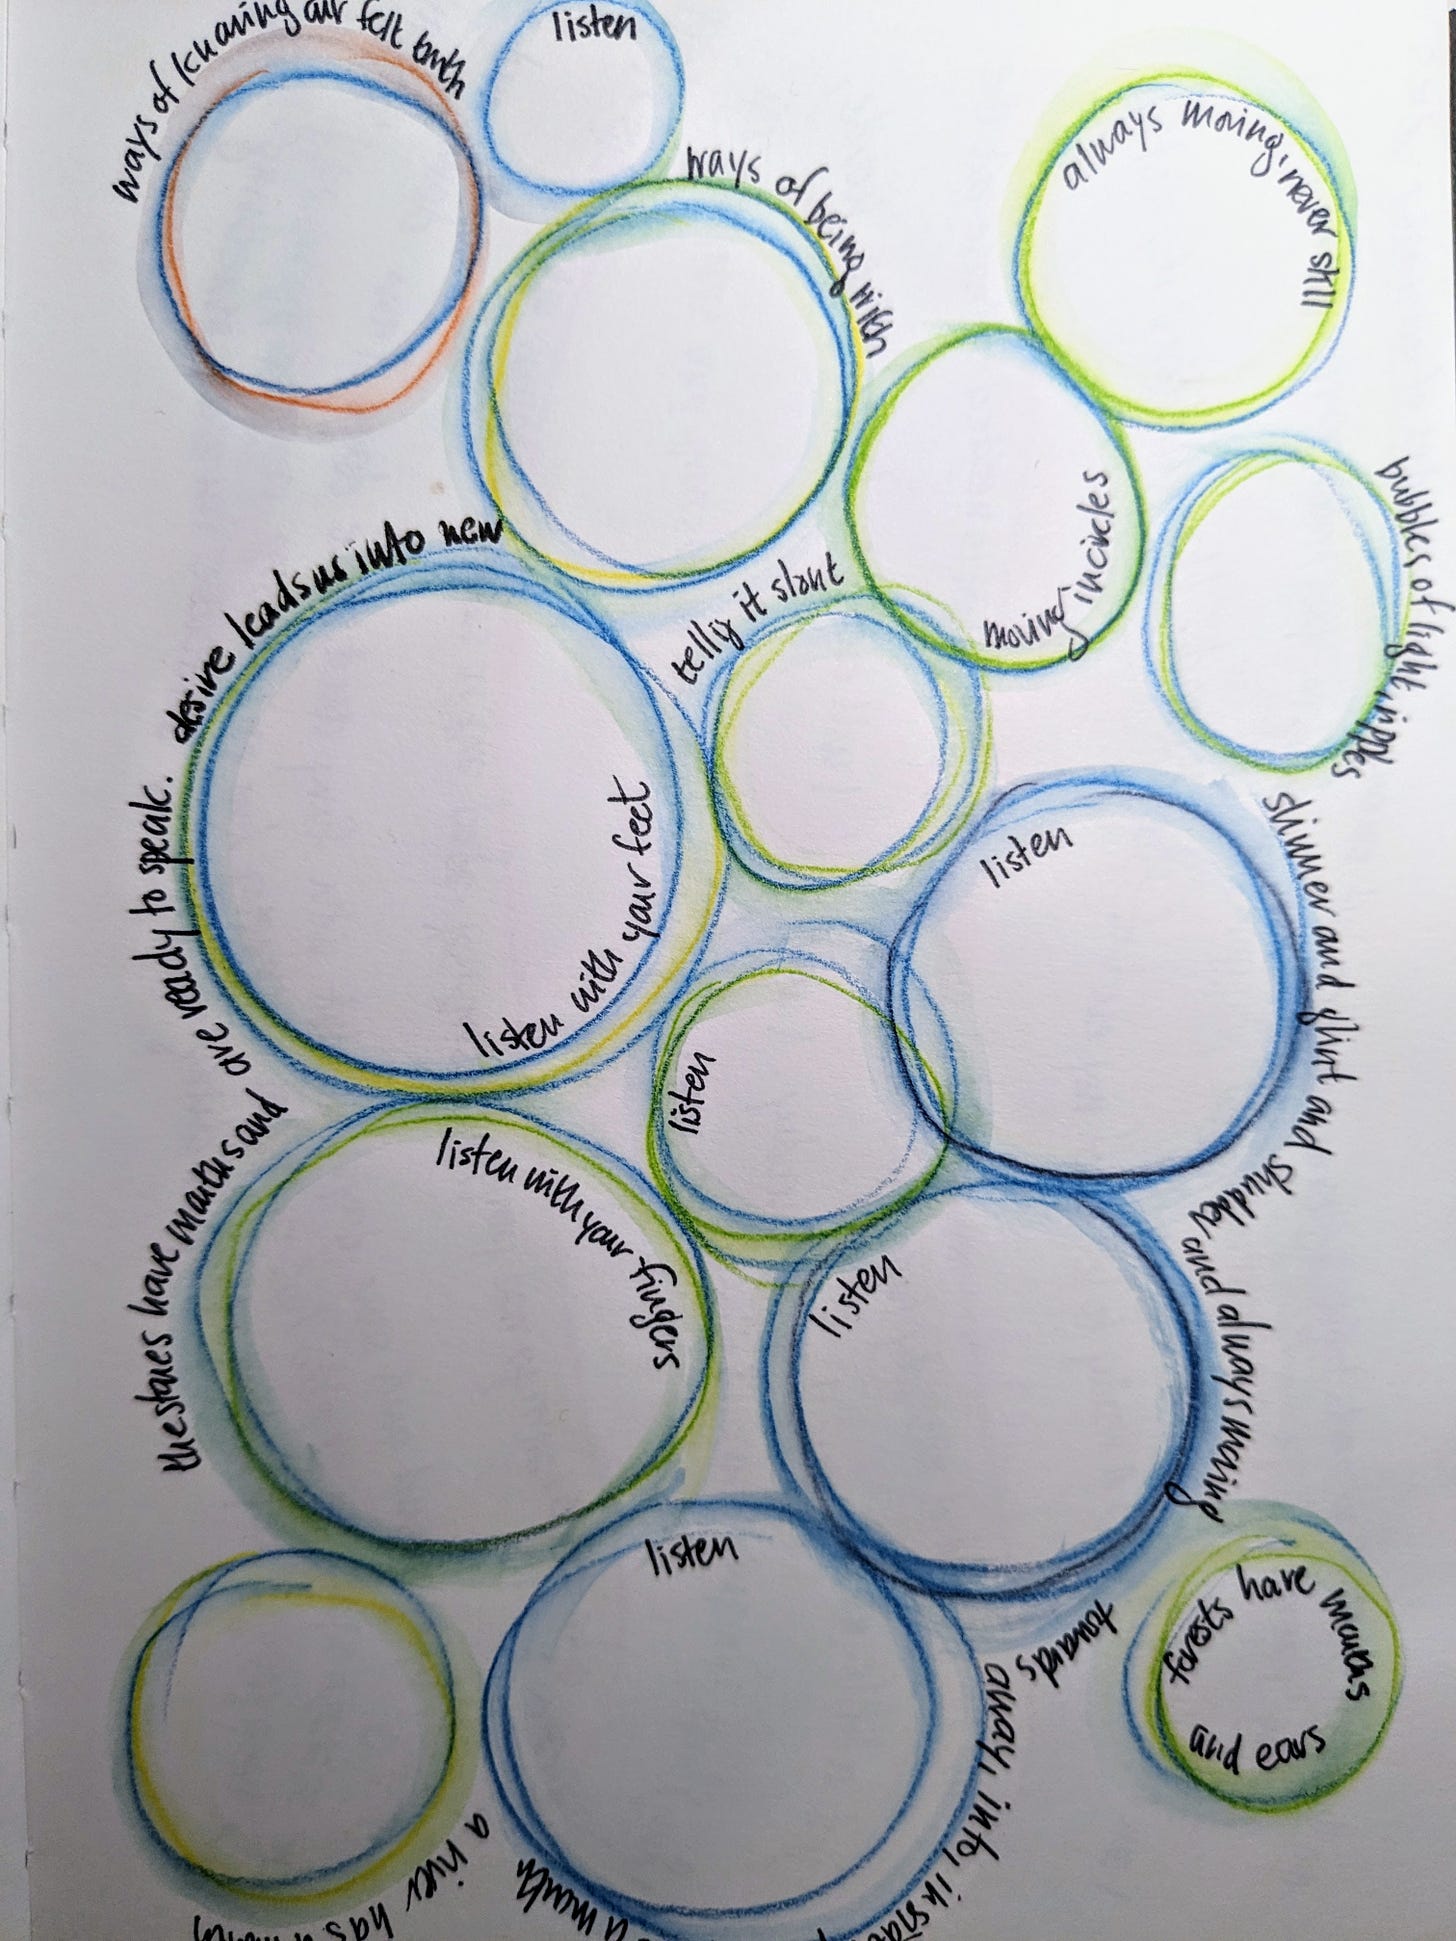 page from my notebook showing doodled circled in coloured pencil, blues and grrens with hints of red and free writing around and inside the circles